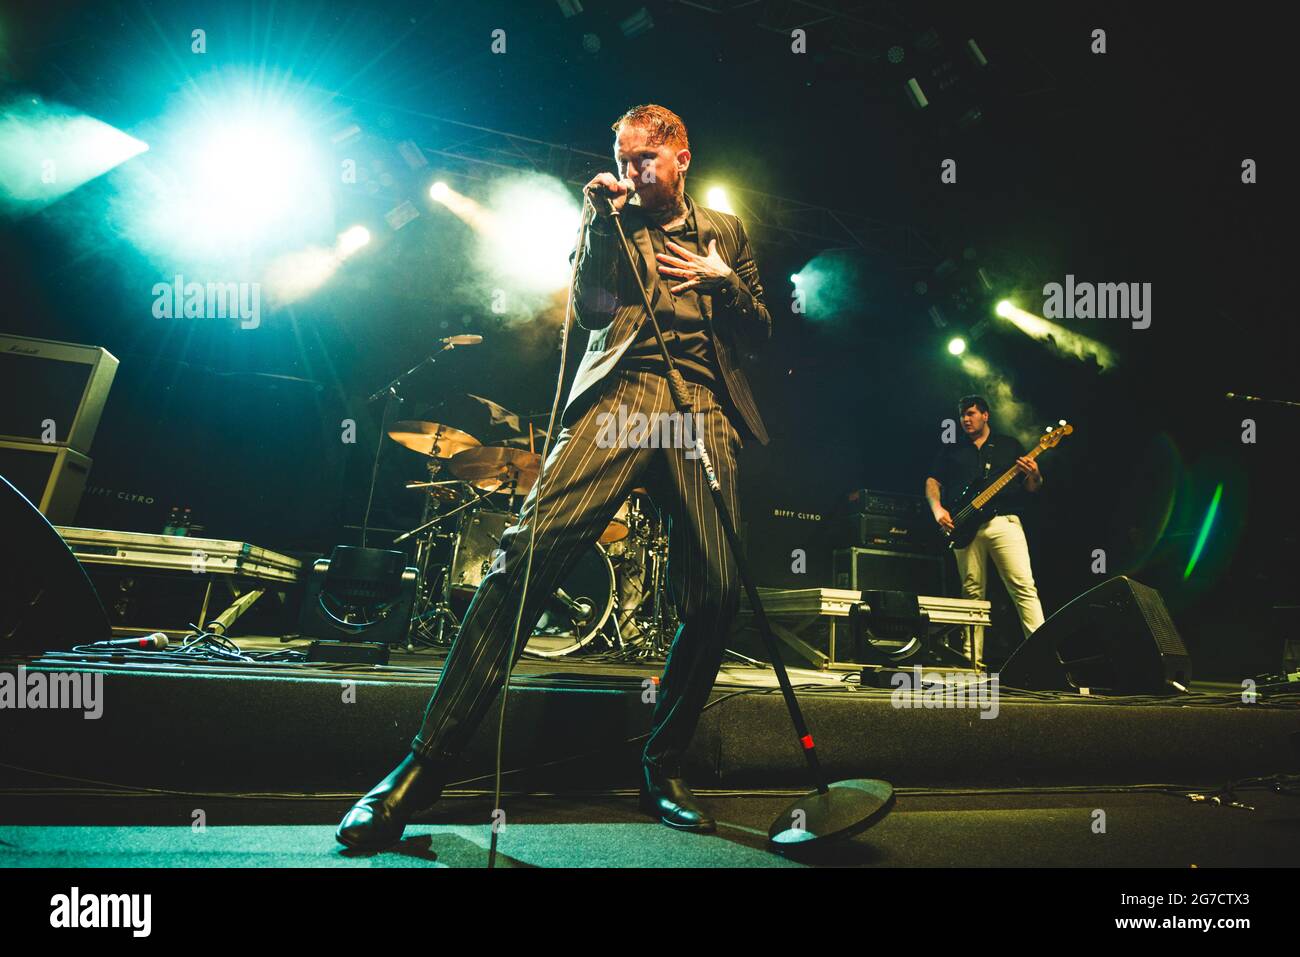 PADOVA, GRAN TEATRO GEOX, ITALY: Frank Carter & The Rattlesnakes performing  live on stage in Padova, opening for the Biffy Clyro “Ellipsis” European  tour concert Stock Photo - Alamy